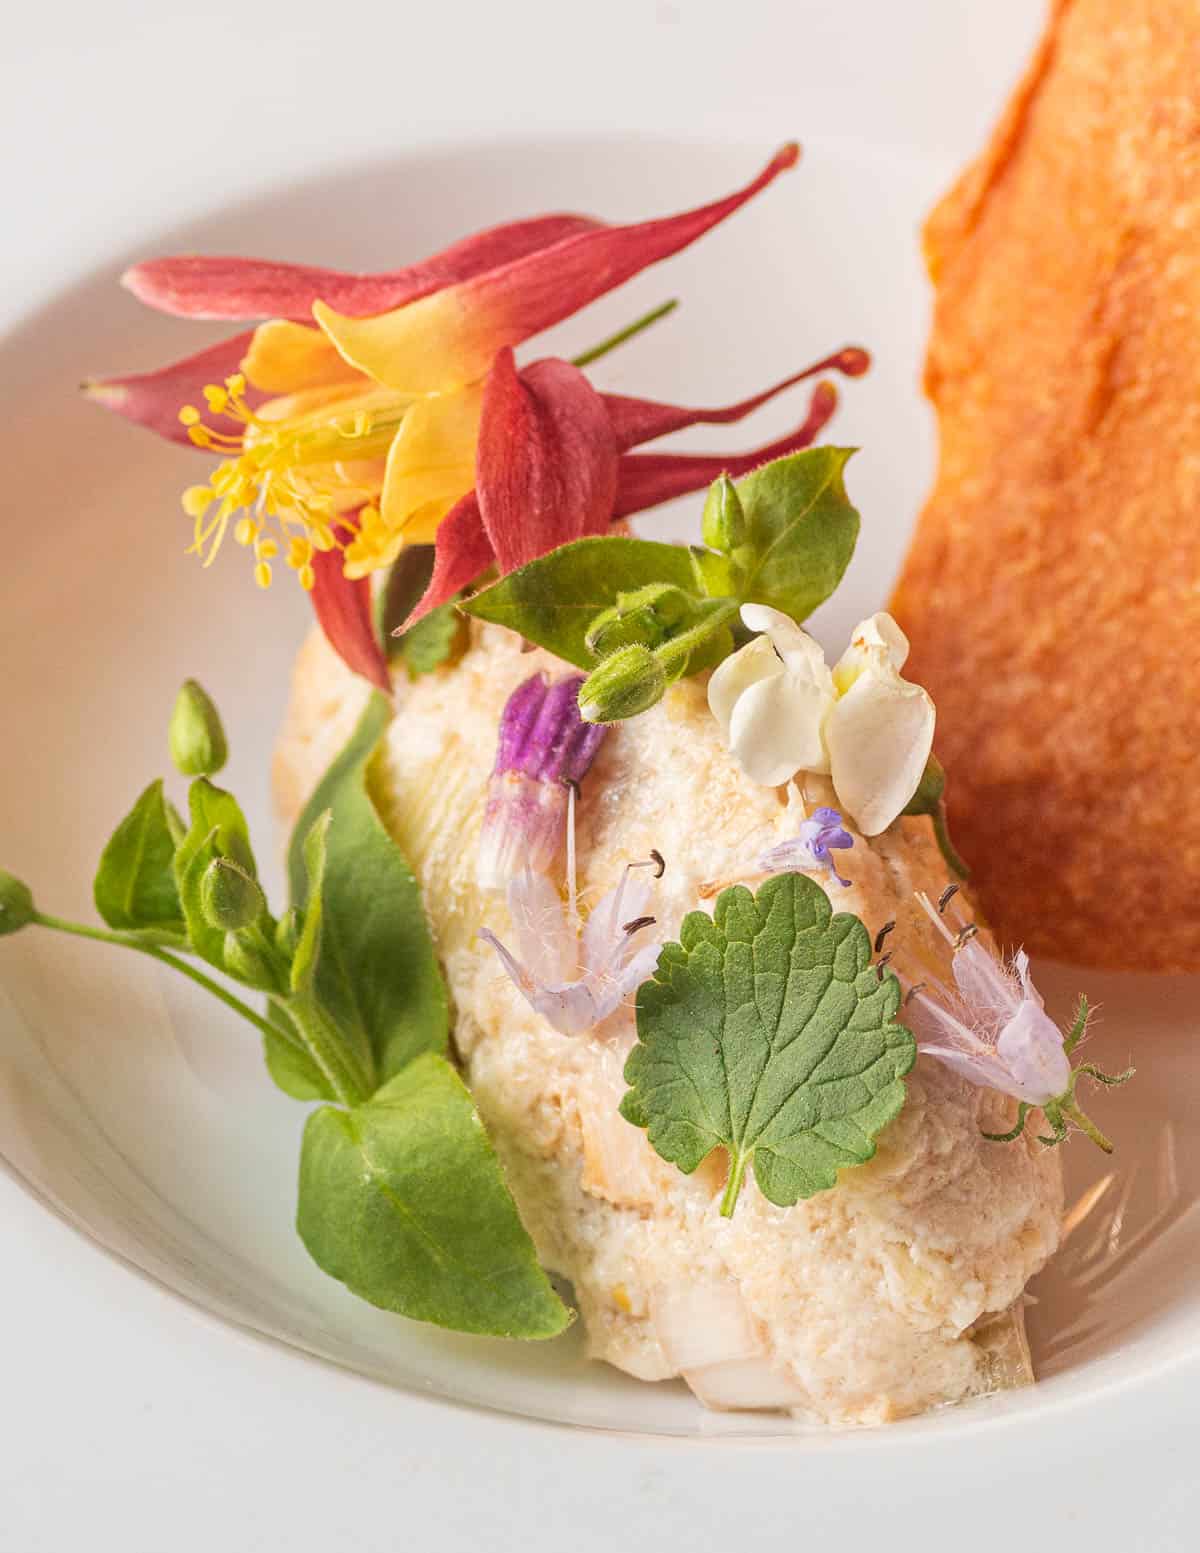 A close up image of a trout salad with wild flowers.